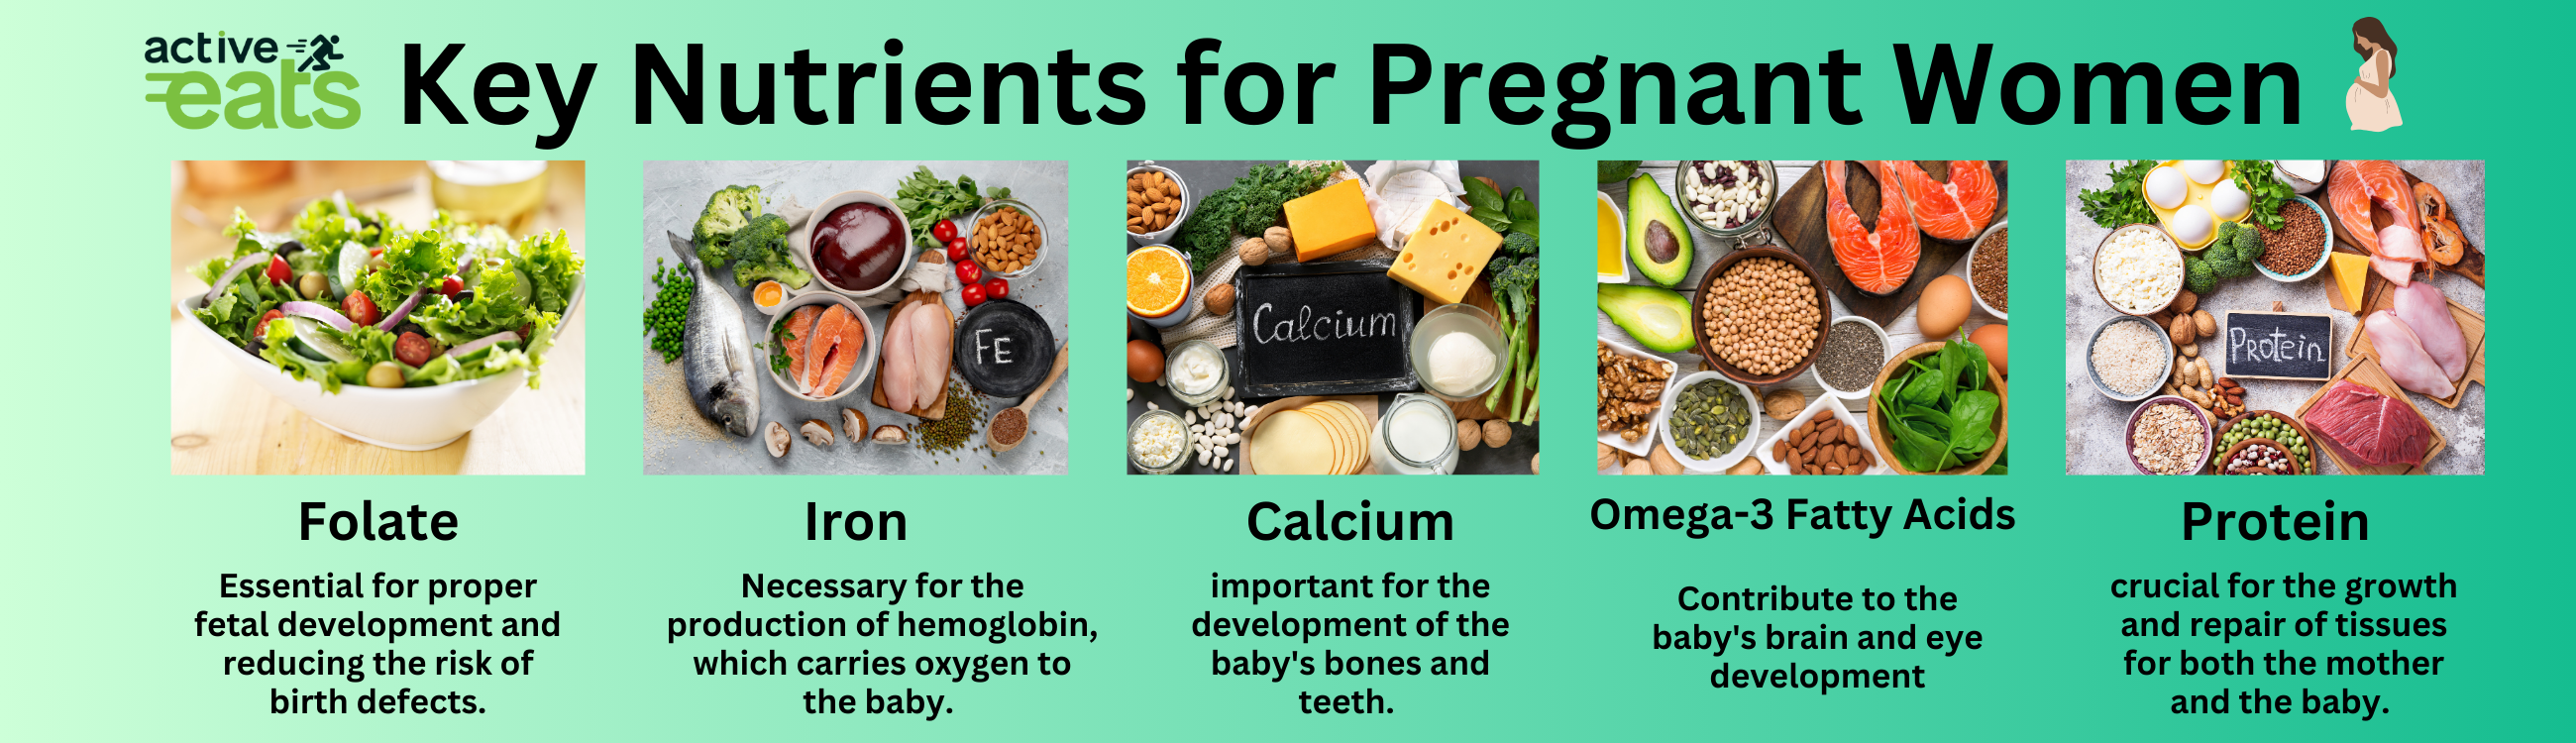 Image shows key nutrients for pregnant women which are folate which is essential for proper fetal development, iron which is necessary for hemoglobin, calcium which is important for development of baby's bone health, omega-3 which contributes for baby's brain and protein which is important for growth of tissues.